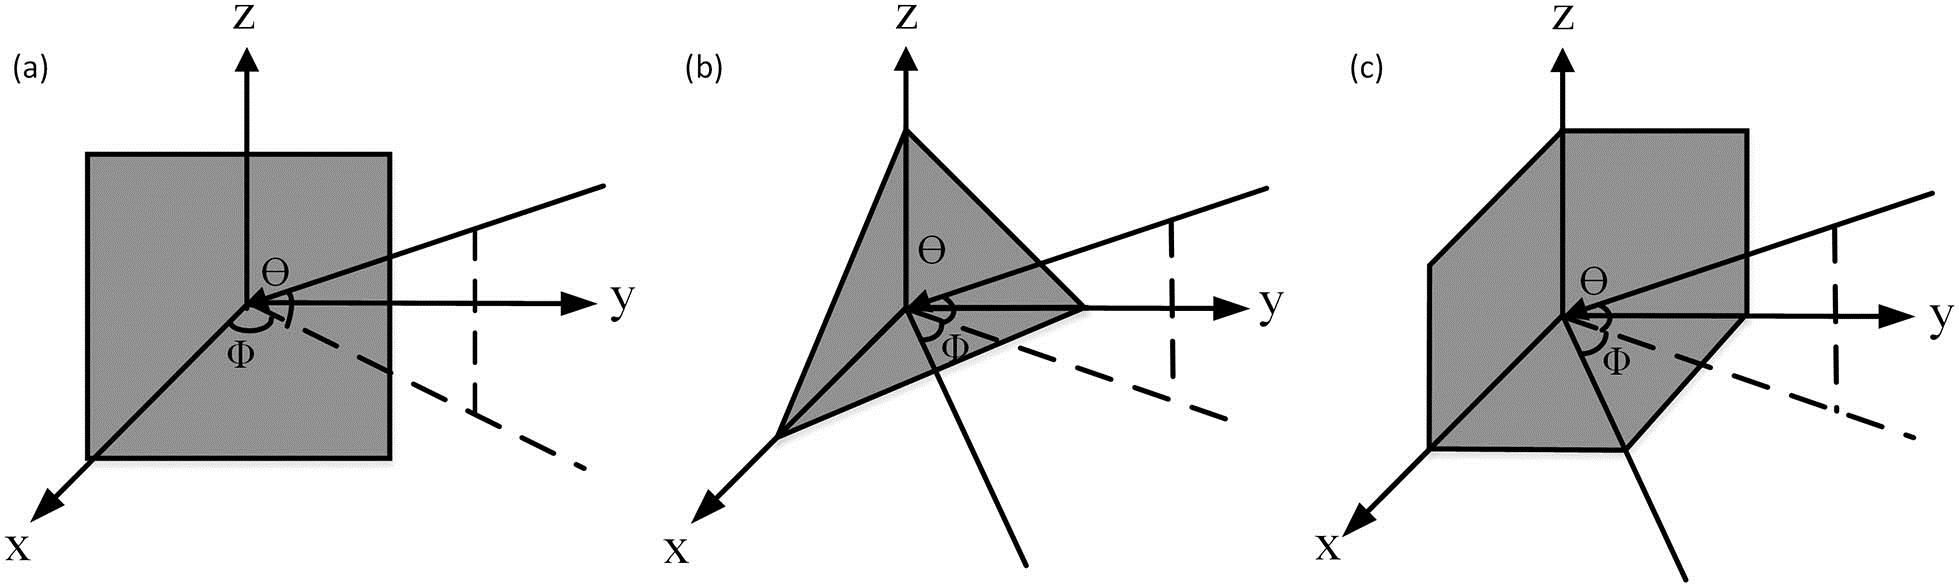 (a) Geometry of a metal plate. (b) The geometry of a triangular trihedral corner reflector. (c) The geometry of a square trihedral corner reflector.